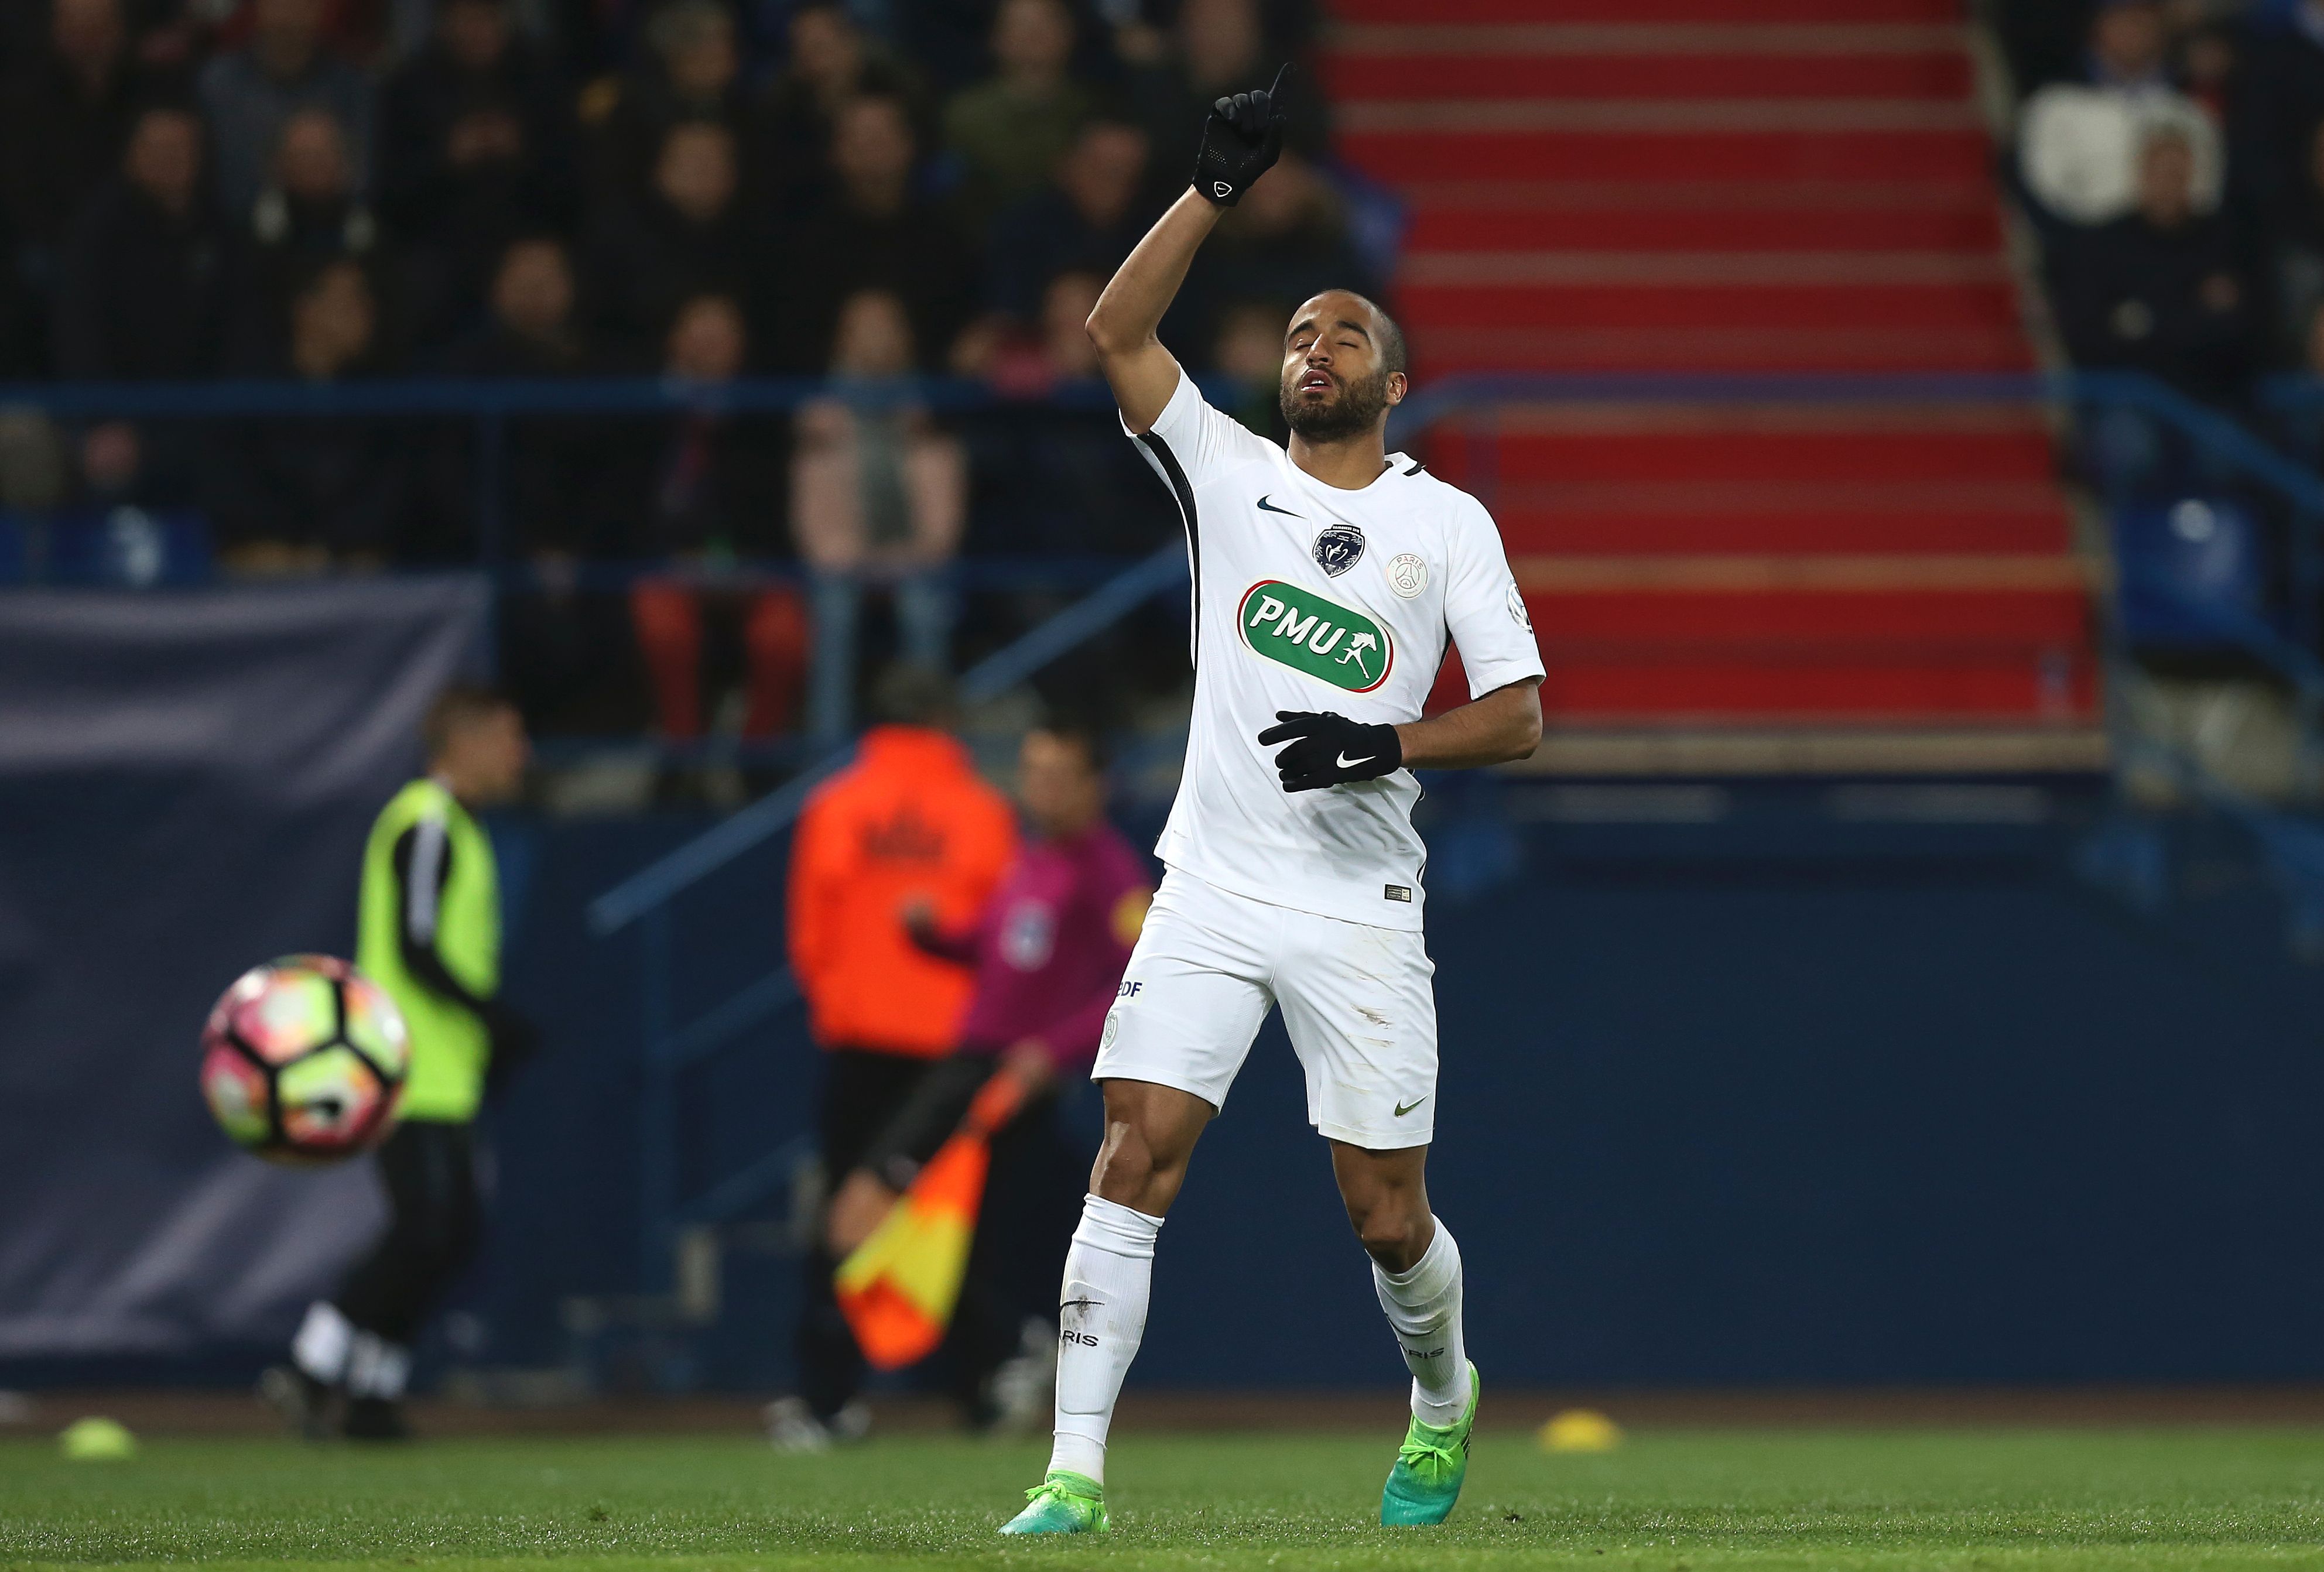 Paris Saint-Germain's Brazilian midfielder Lucas Moura scores during the French Cup football match between Avranches (USA) and Paris Saint-Germain (PSG), on April 5, 2017, in Michel D'Ornano Stadium, in Caen, northwestern France. / AFP PHOTO / CHARLY TRIBALLEAU        (Photo credit should read CHARLY TRIBALLEAU/AFP/Getty Images)